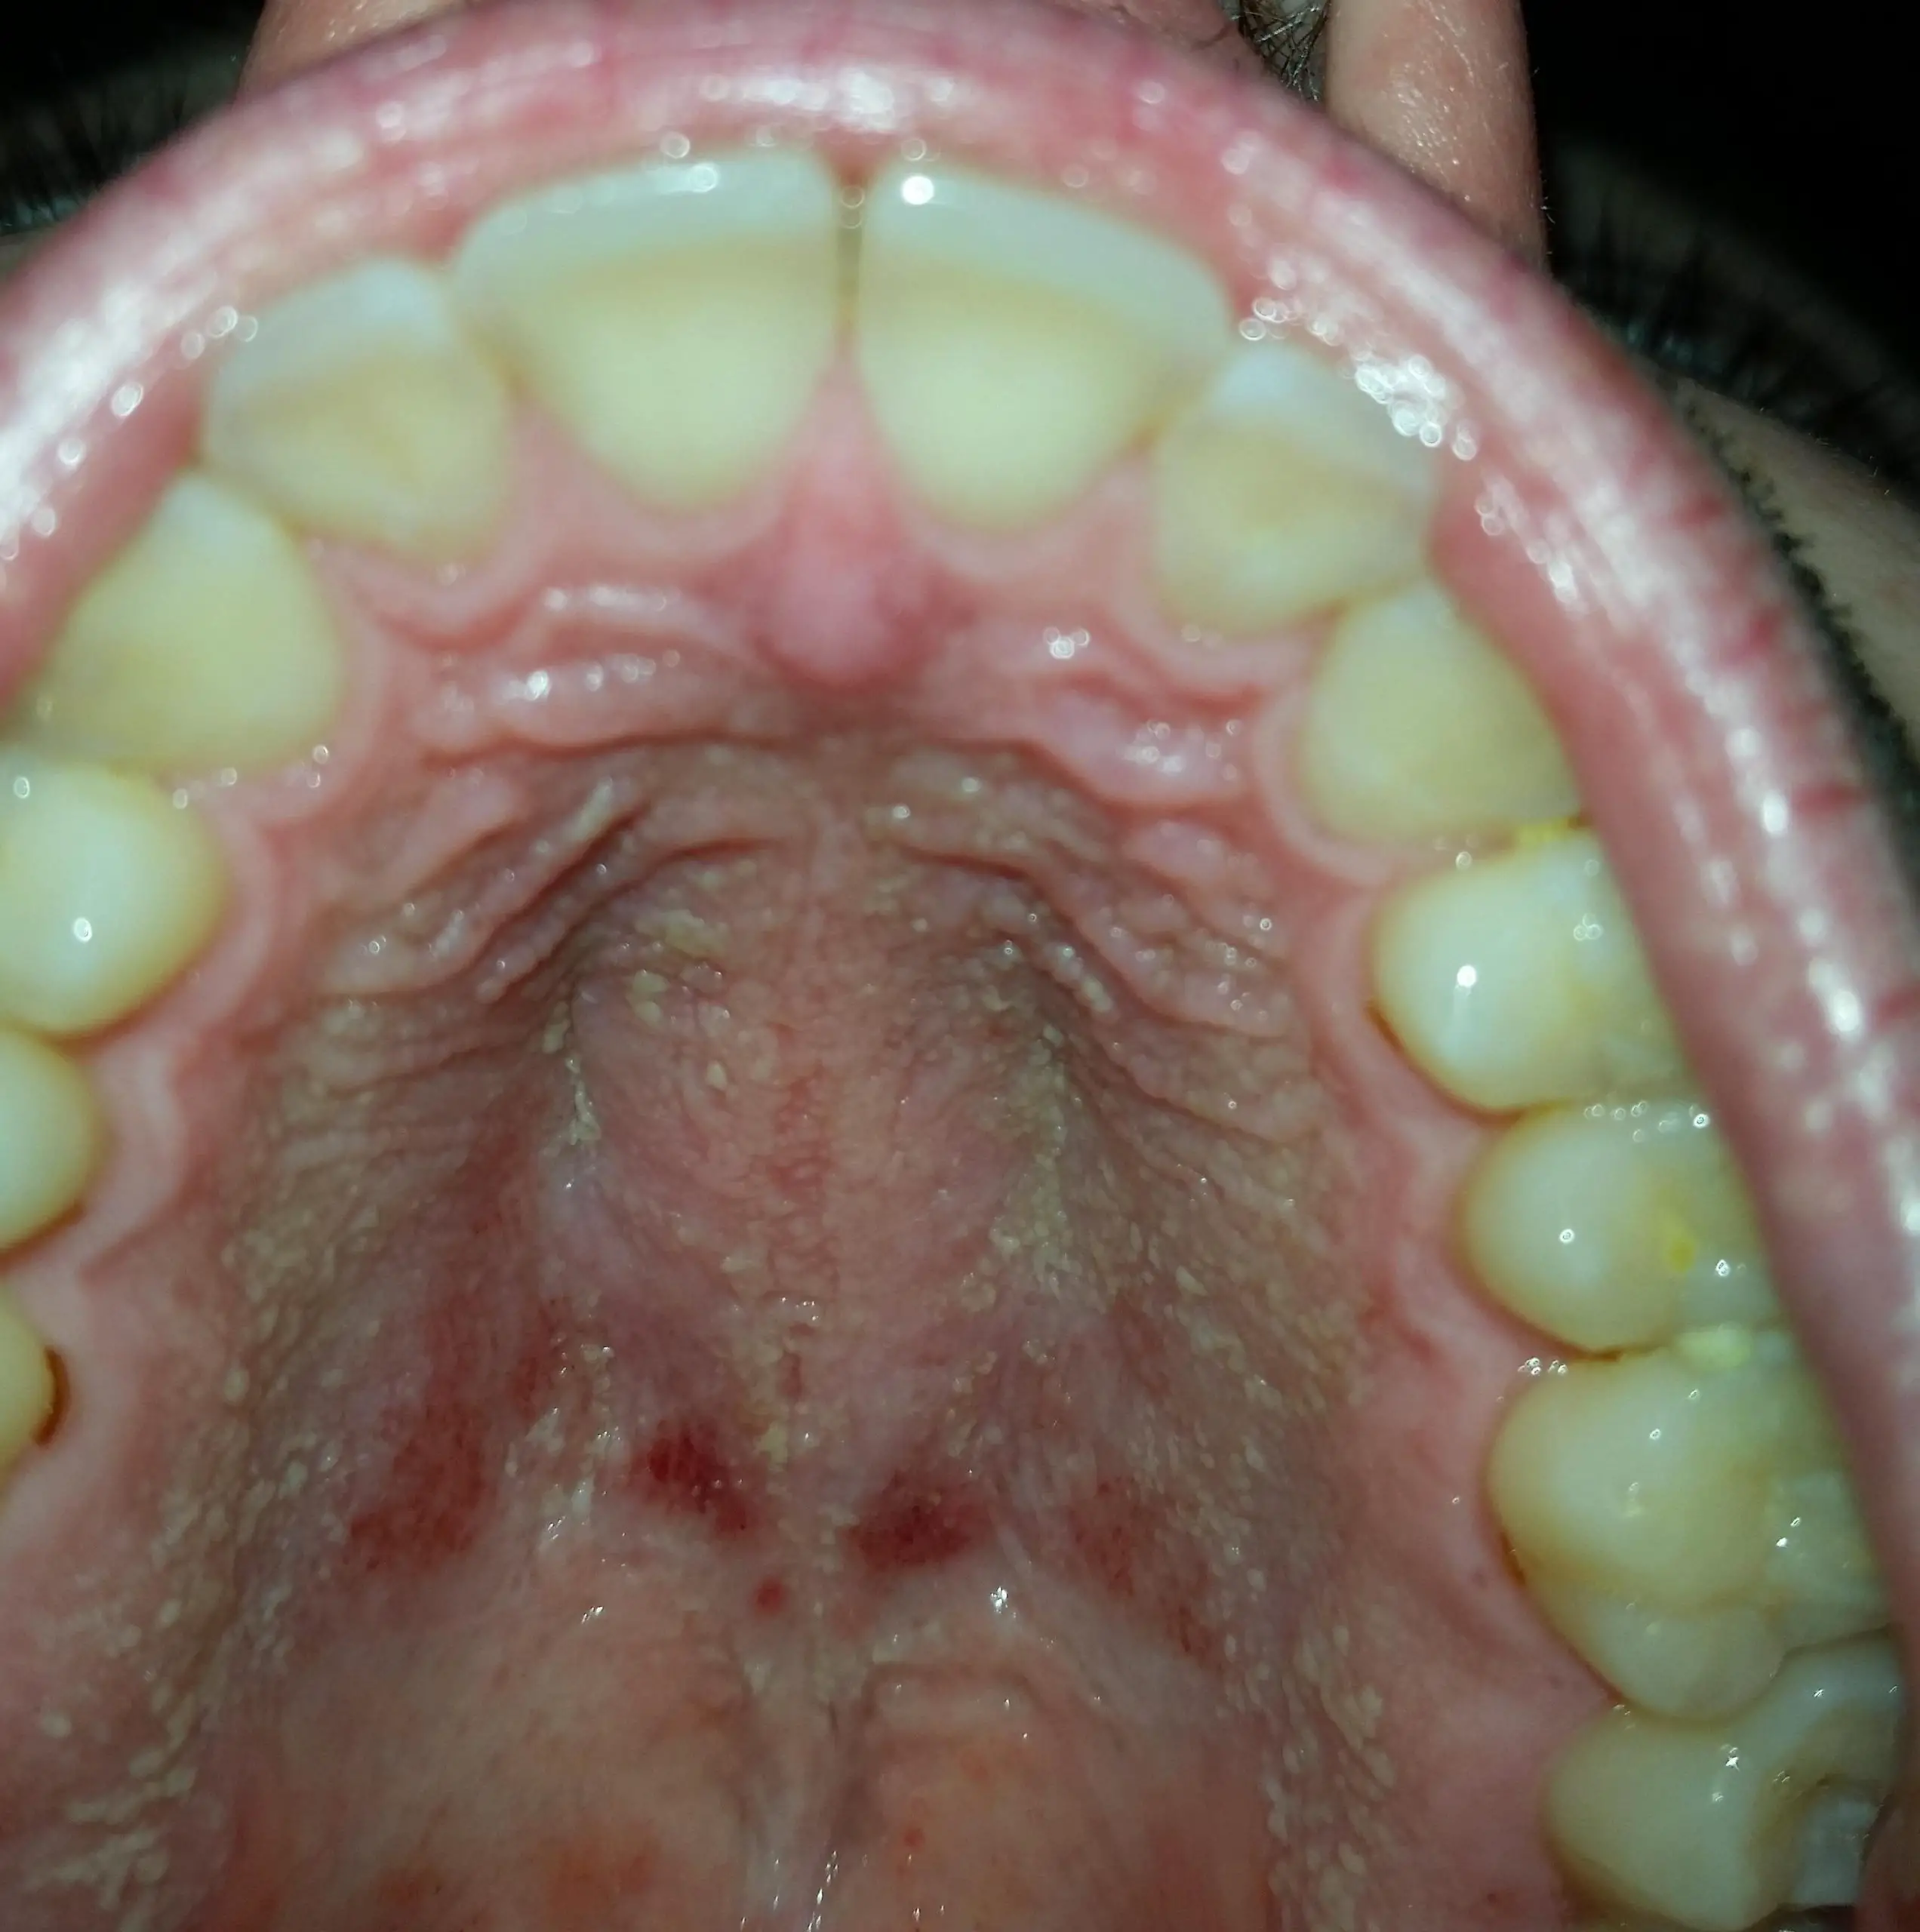 Rash on roof of mouth. Any advice appreciated : Dentistry